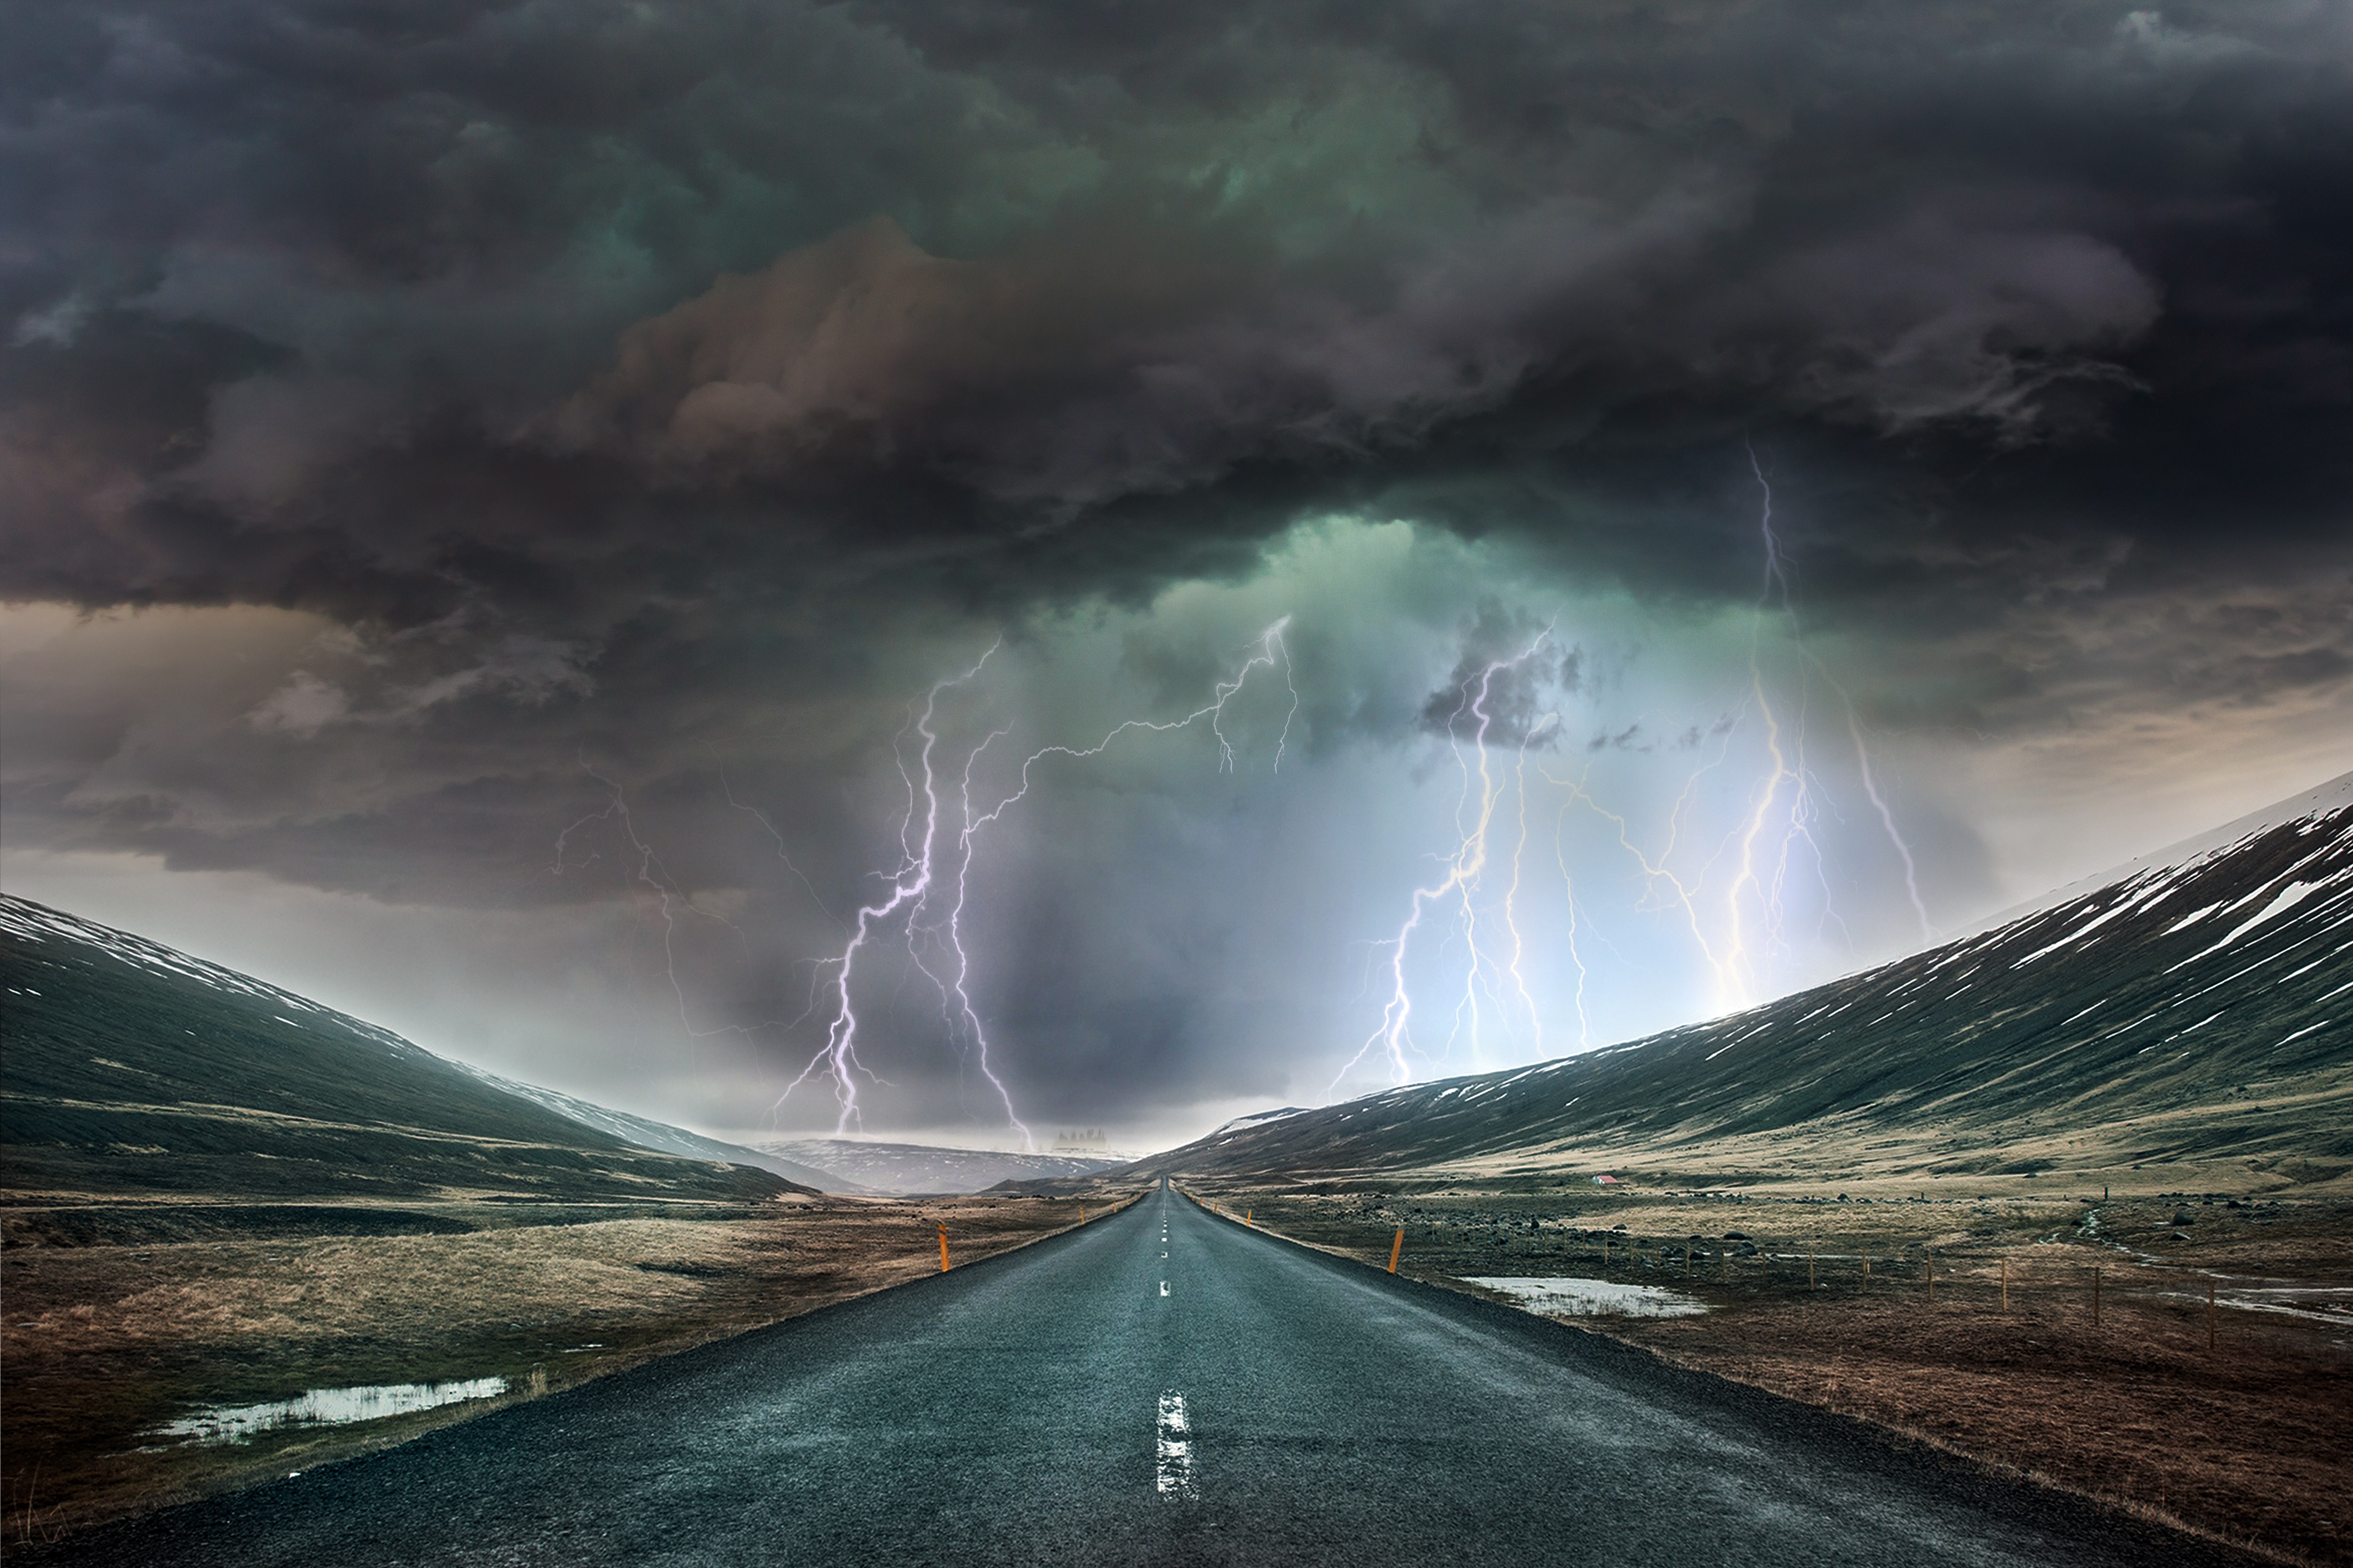 500 Thunderstorm Pictures HD  Download Free Images on Unsplash